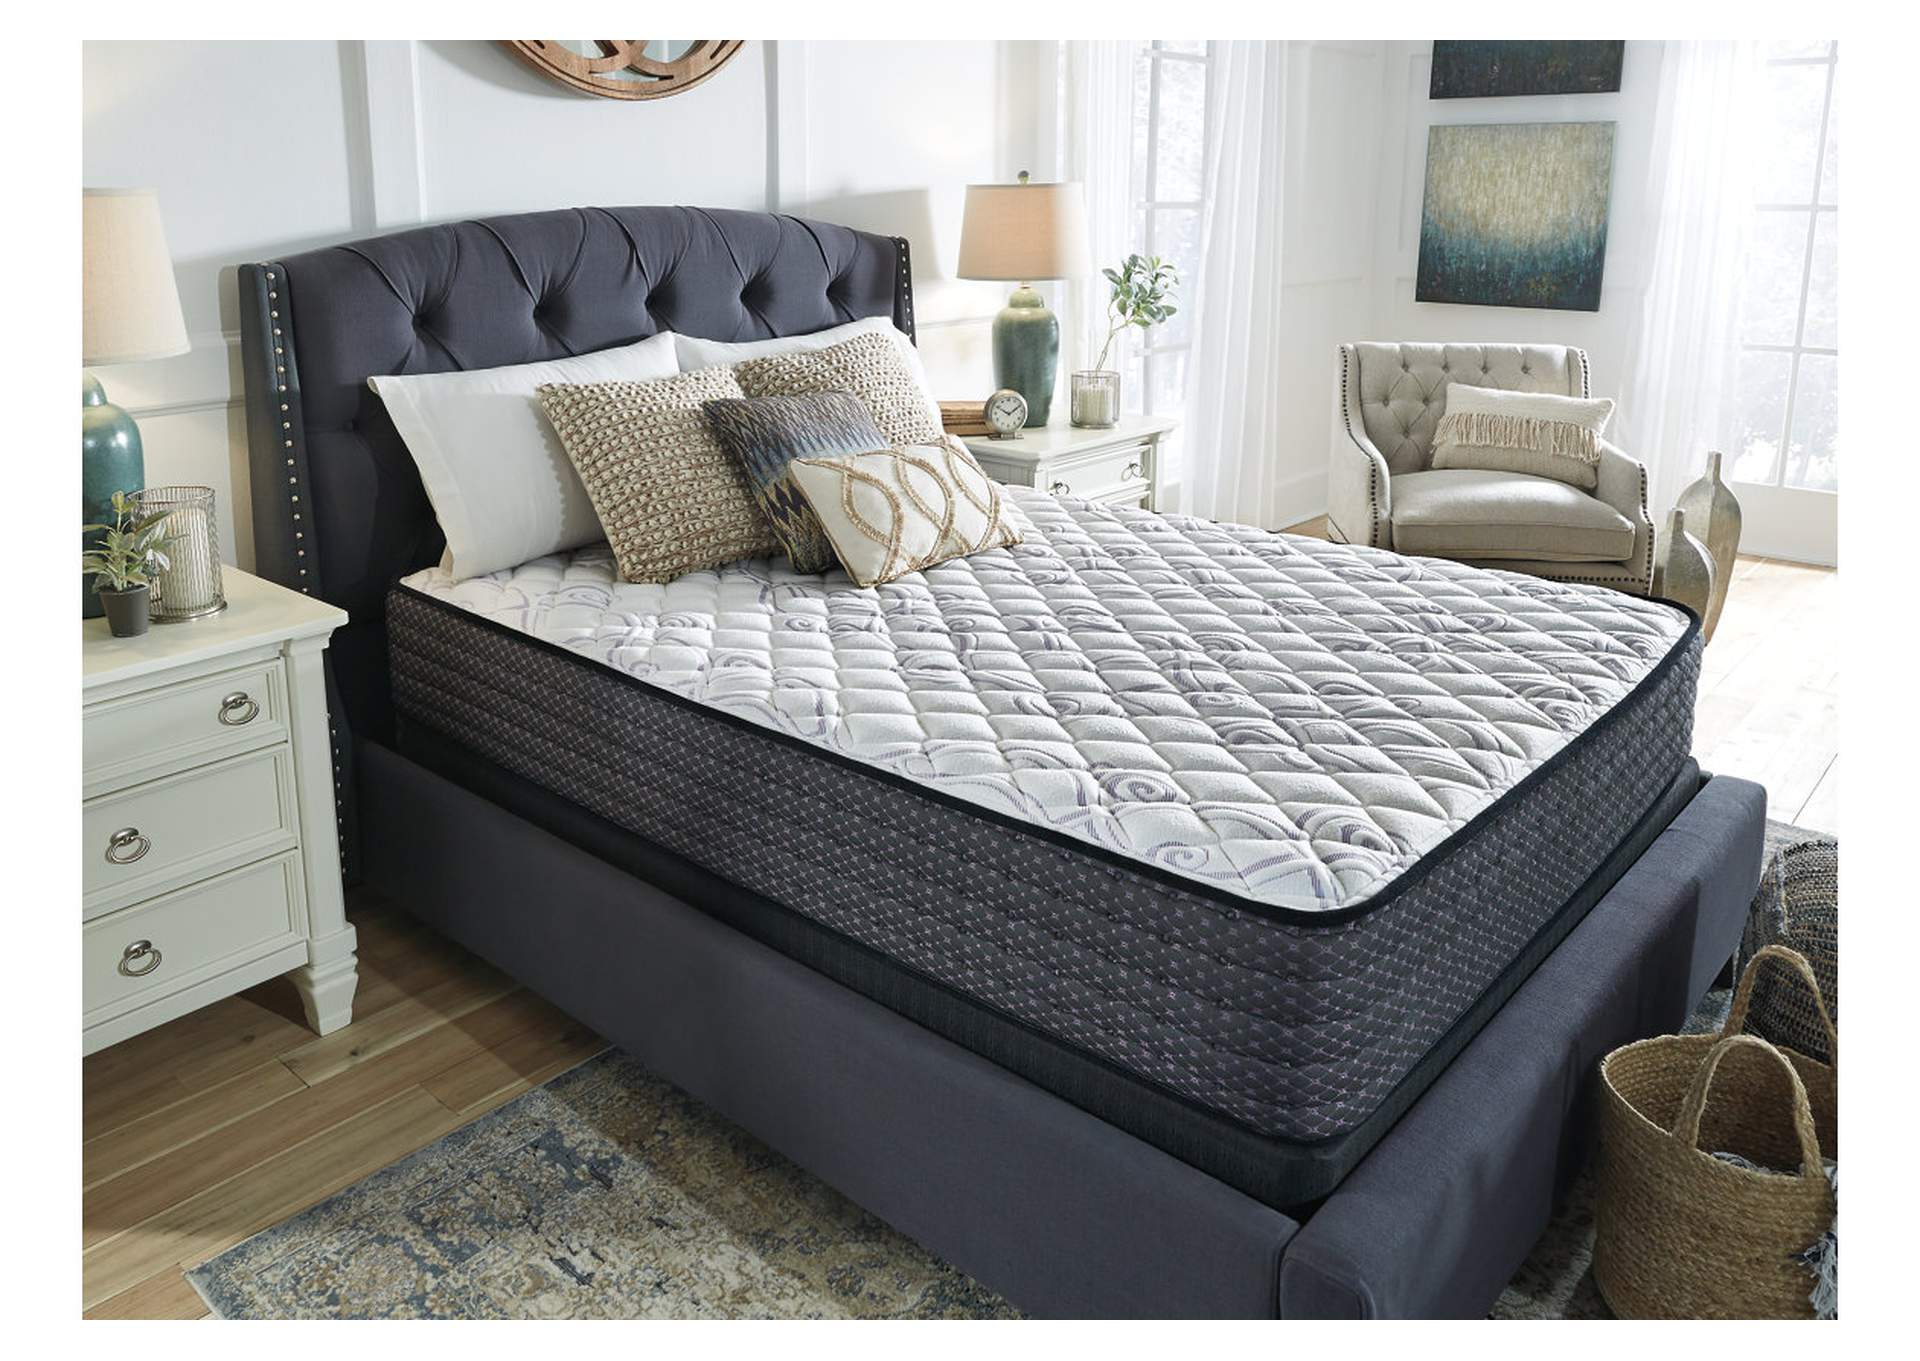 Limited Edition Firm Queen Mattress,Direct To Consumer Express